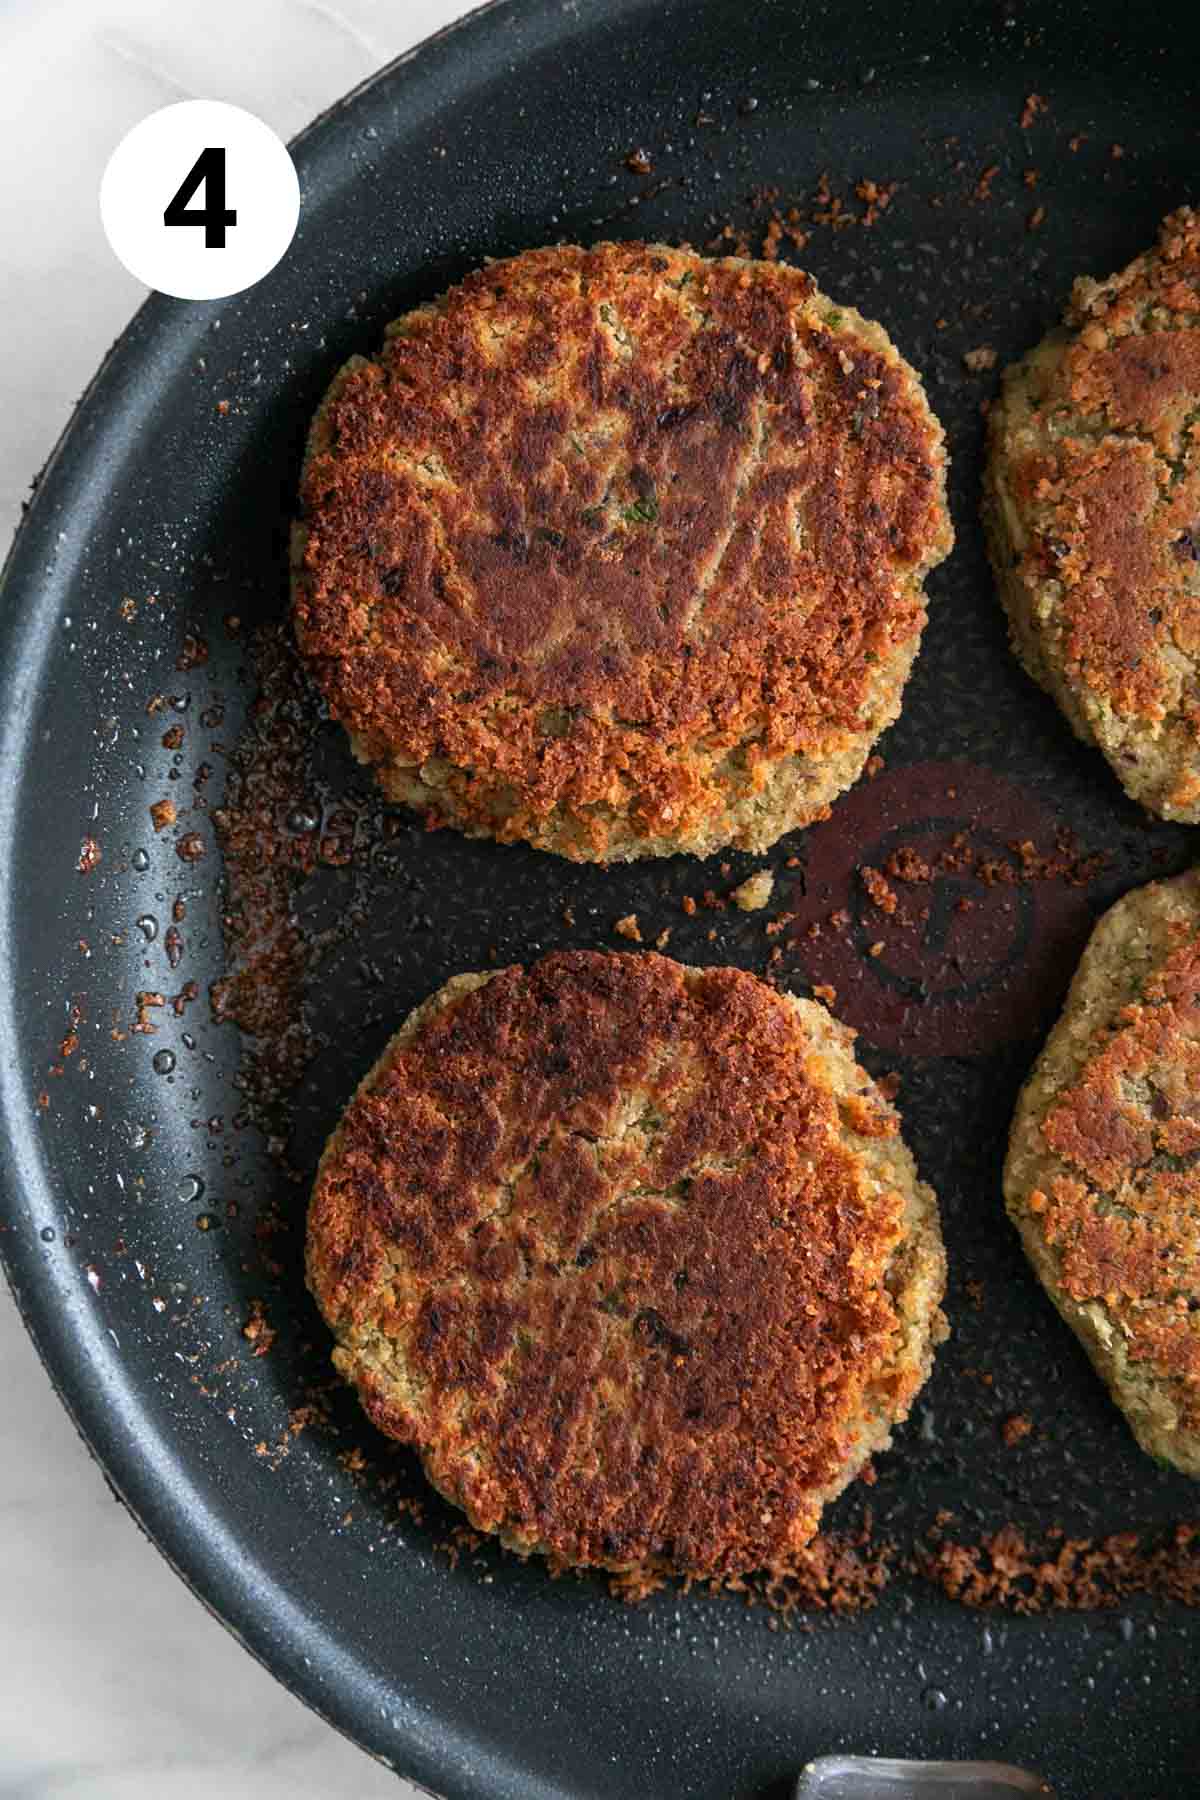 Cooked vegan chickpea burgers in a skillet.